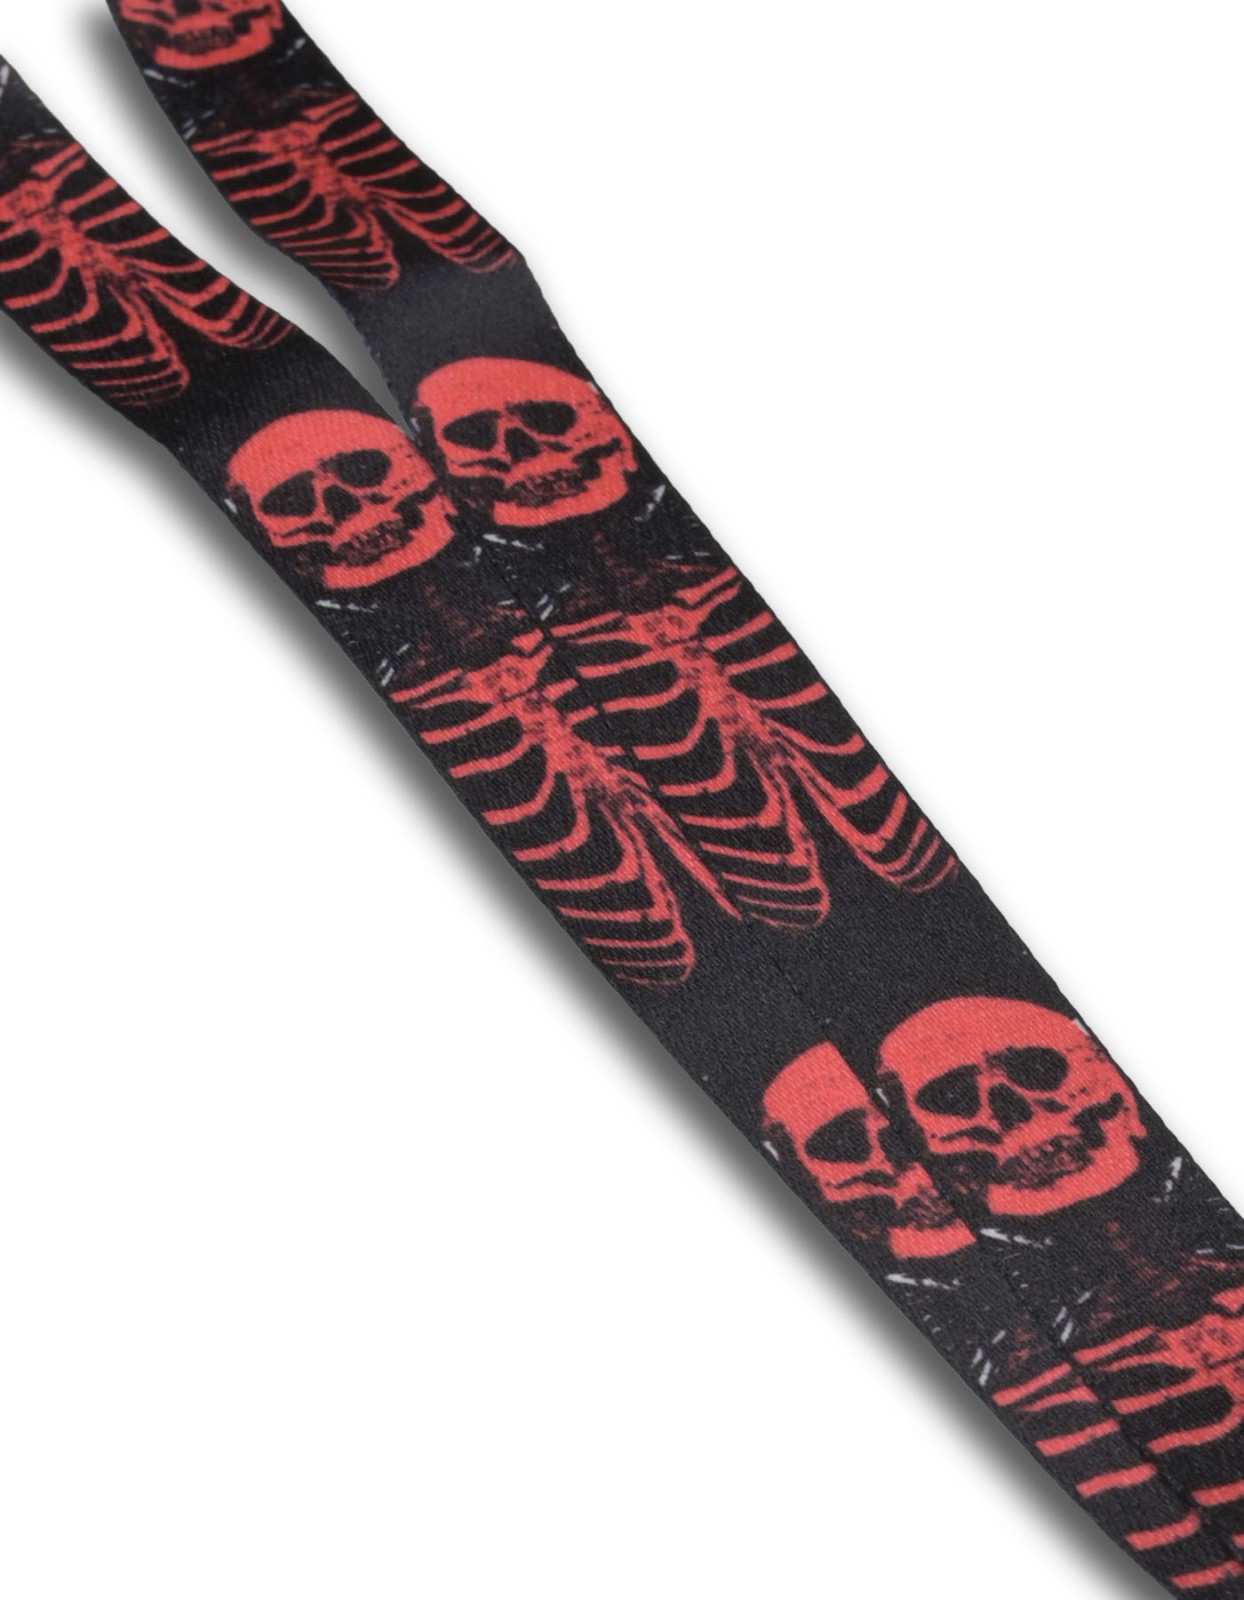 Picture of MACBETH LANYARD  "WORLD TOUR 91 "